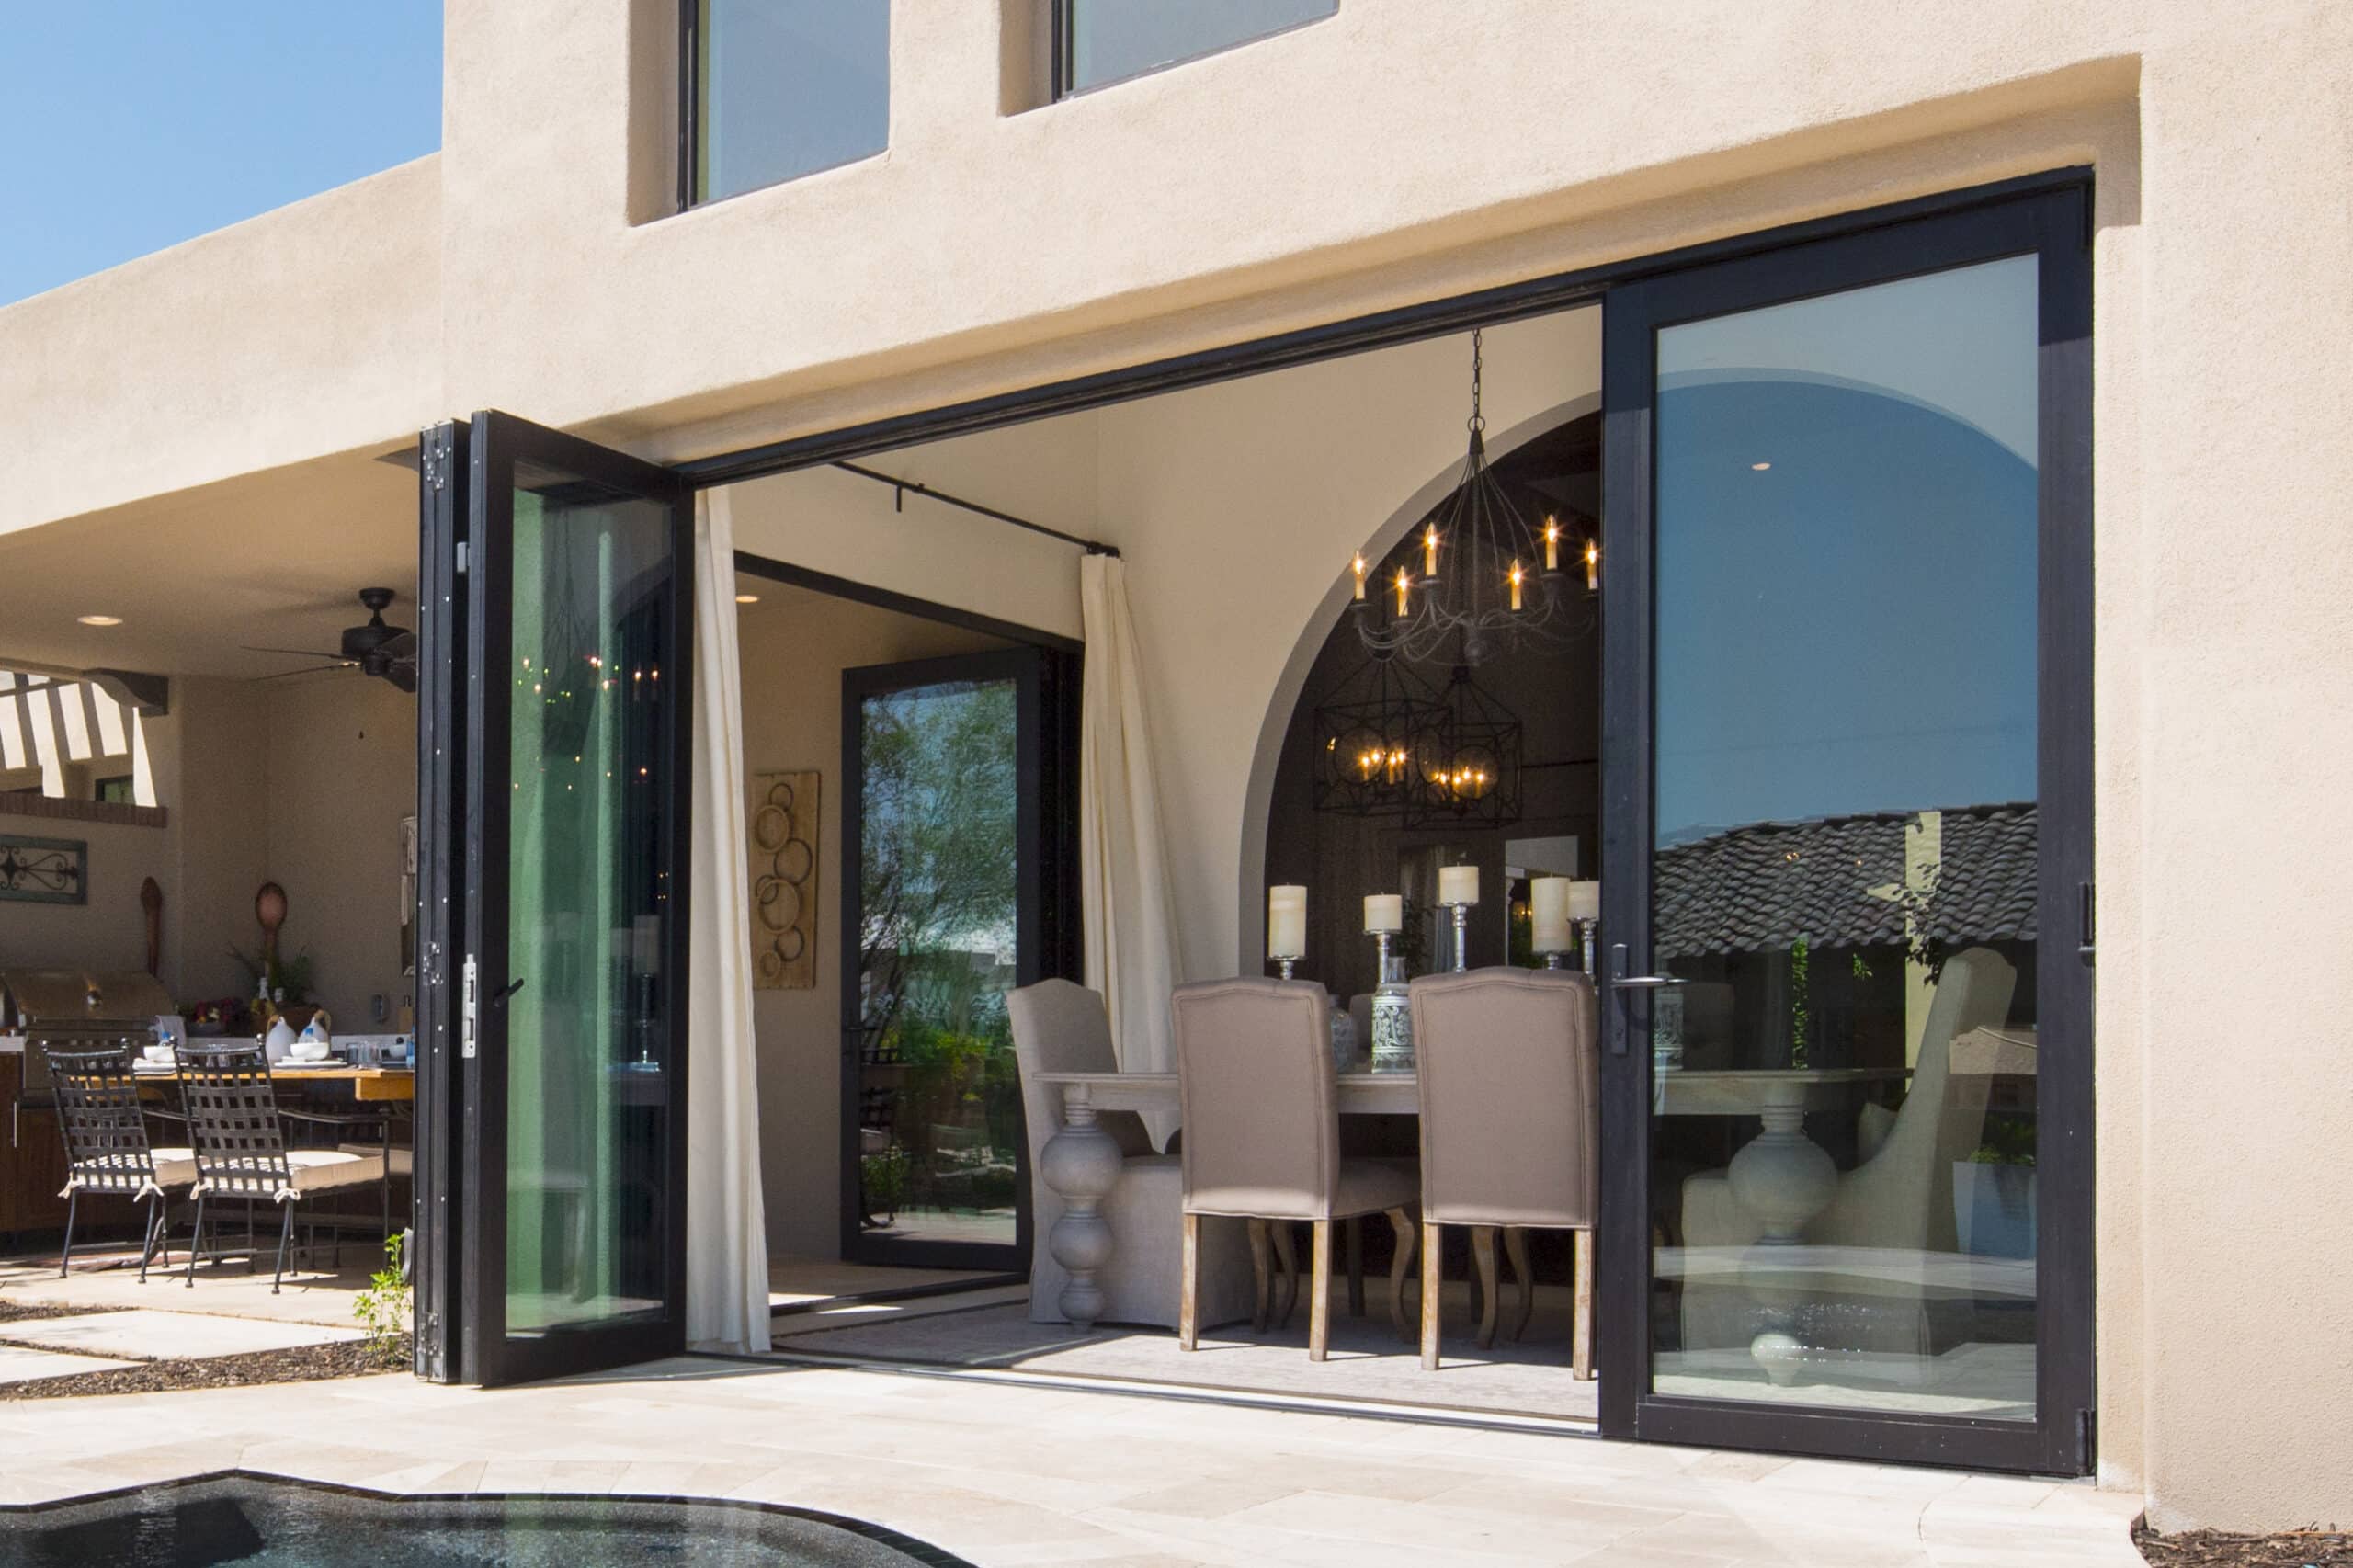 Two open bi-fold doors with a closed egress door connect the dining room to the backyard.